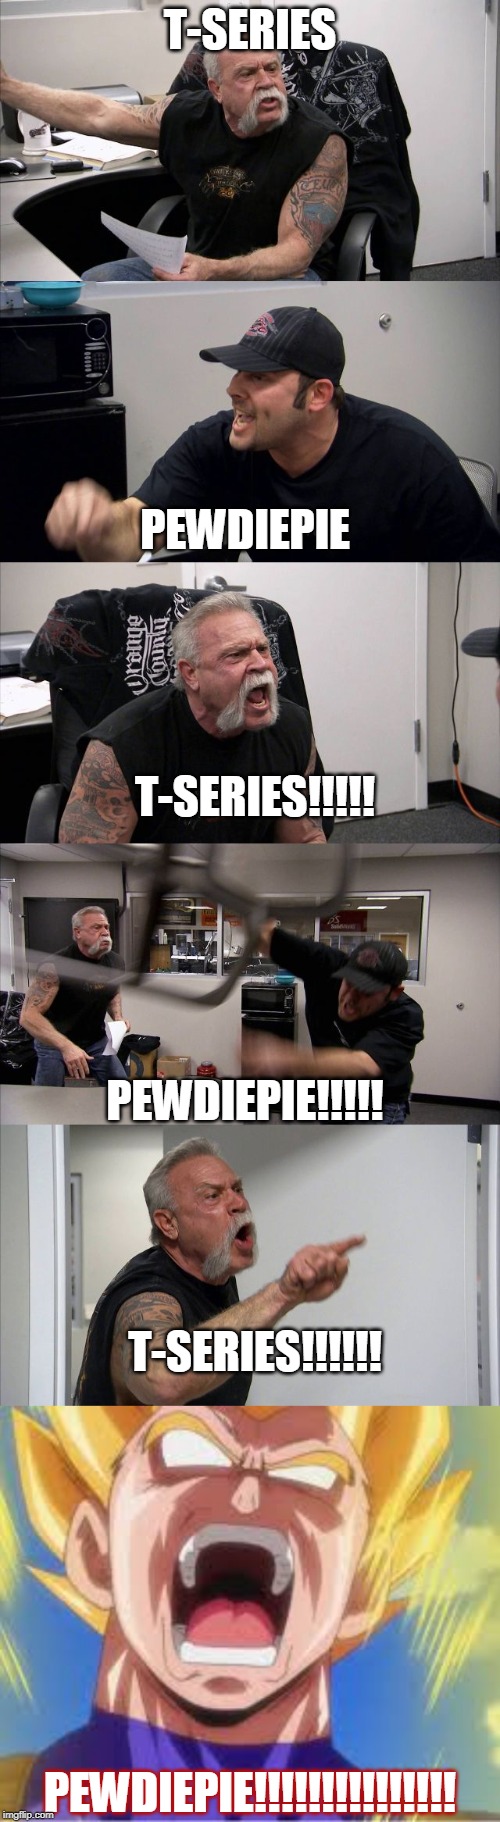 T-SERIES; PEWDIEPIE; T-SERIES!!!!! PEWDIEPIE!!!!! T-SERIES!!!!!! PEWDIEPIE!!!!!!!!!!!!!!! | image tagged in memes,american chopper argument | made w/ Imgflip meme maker